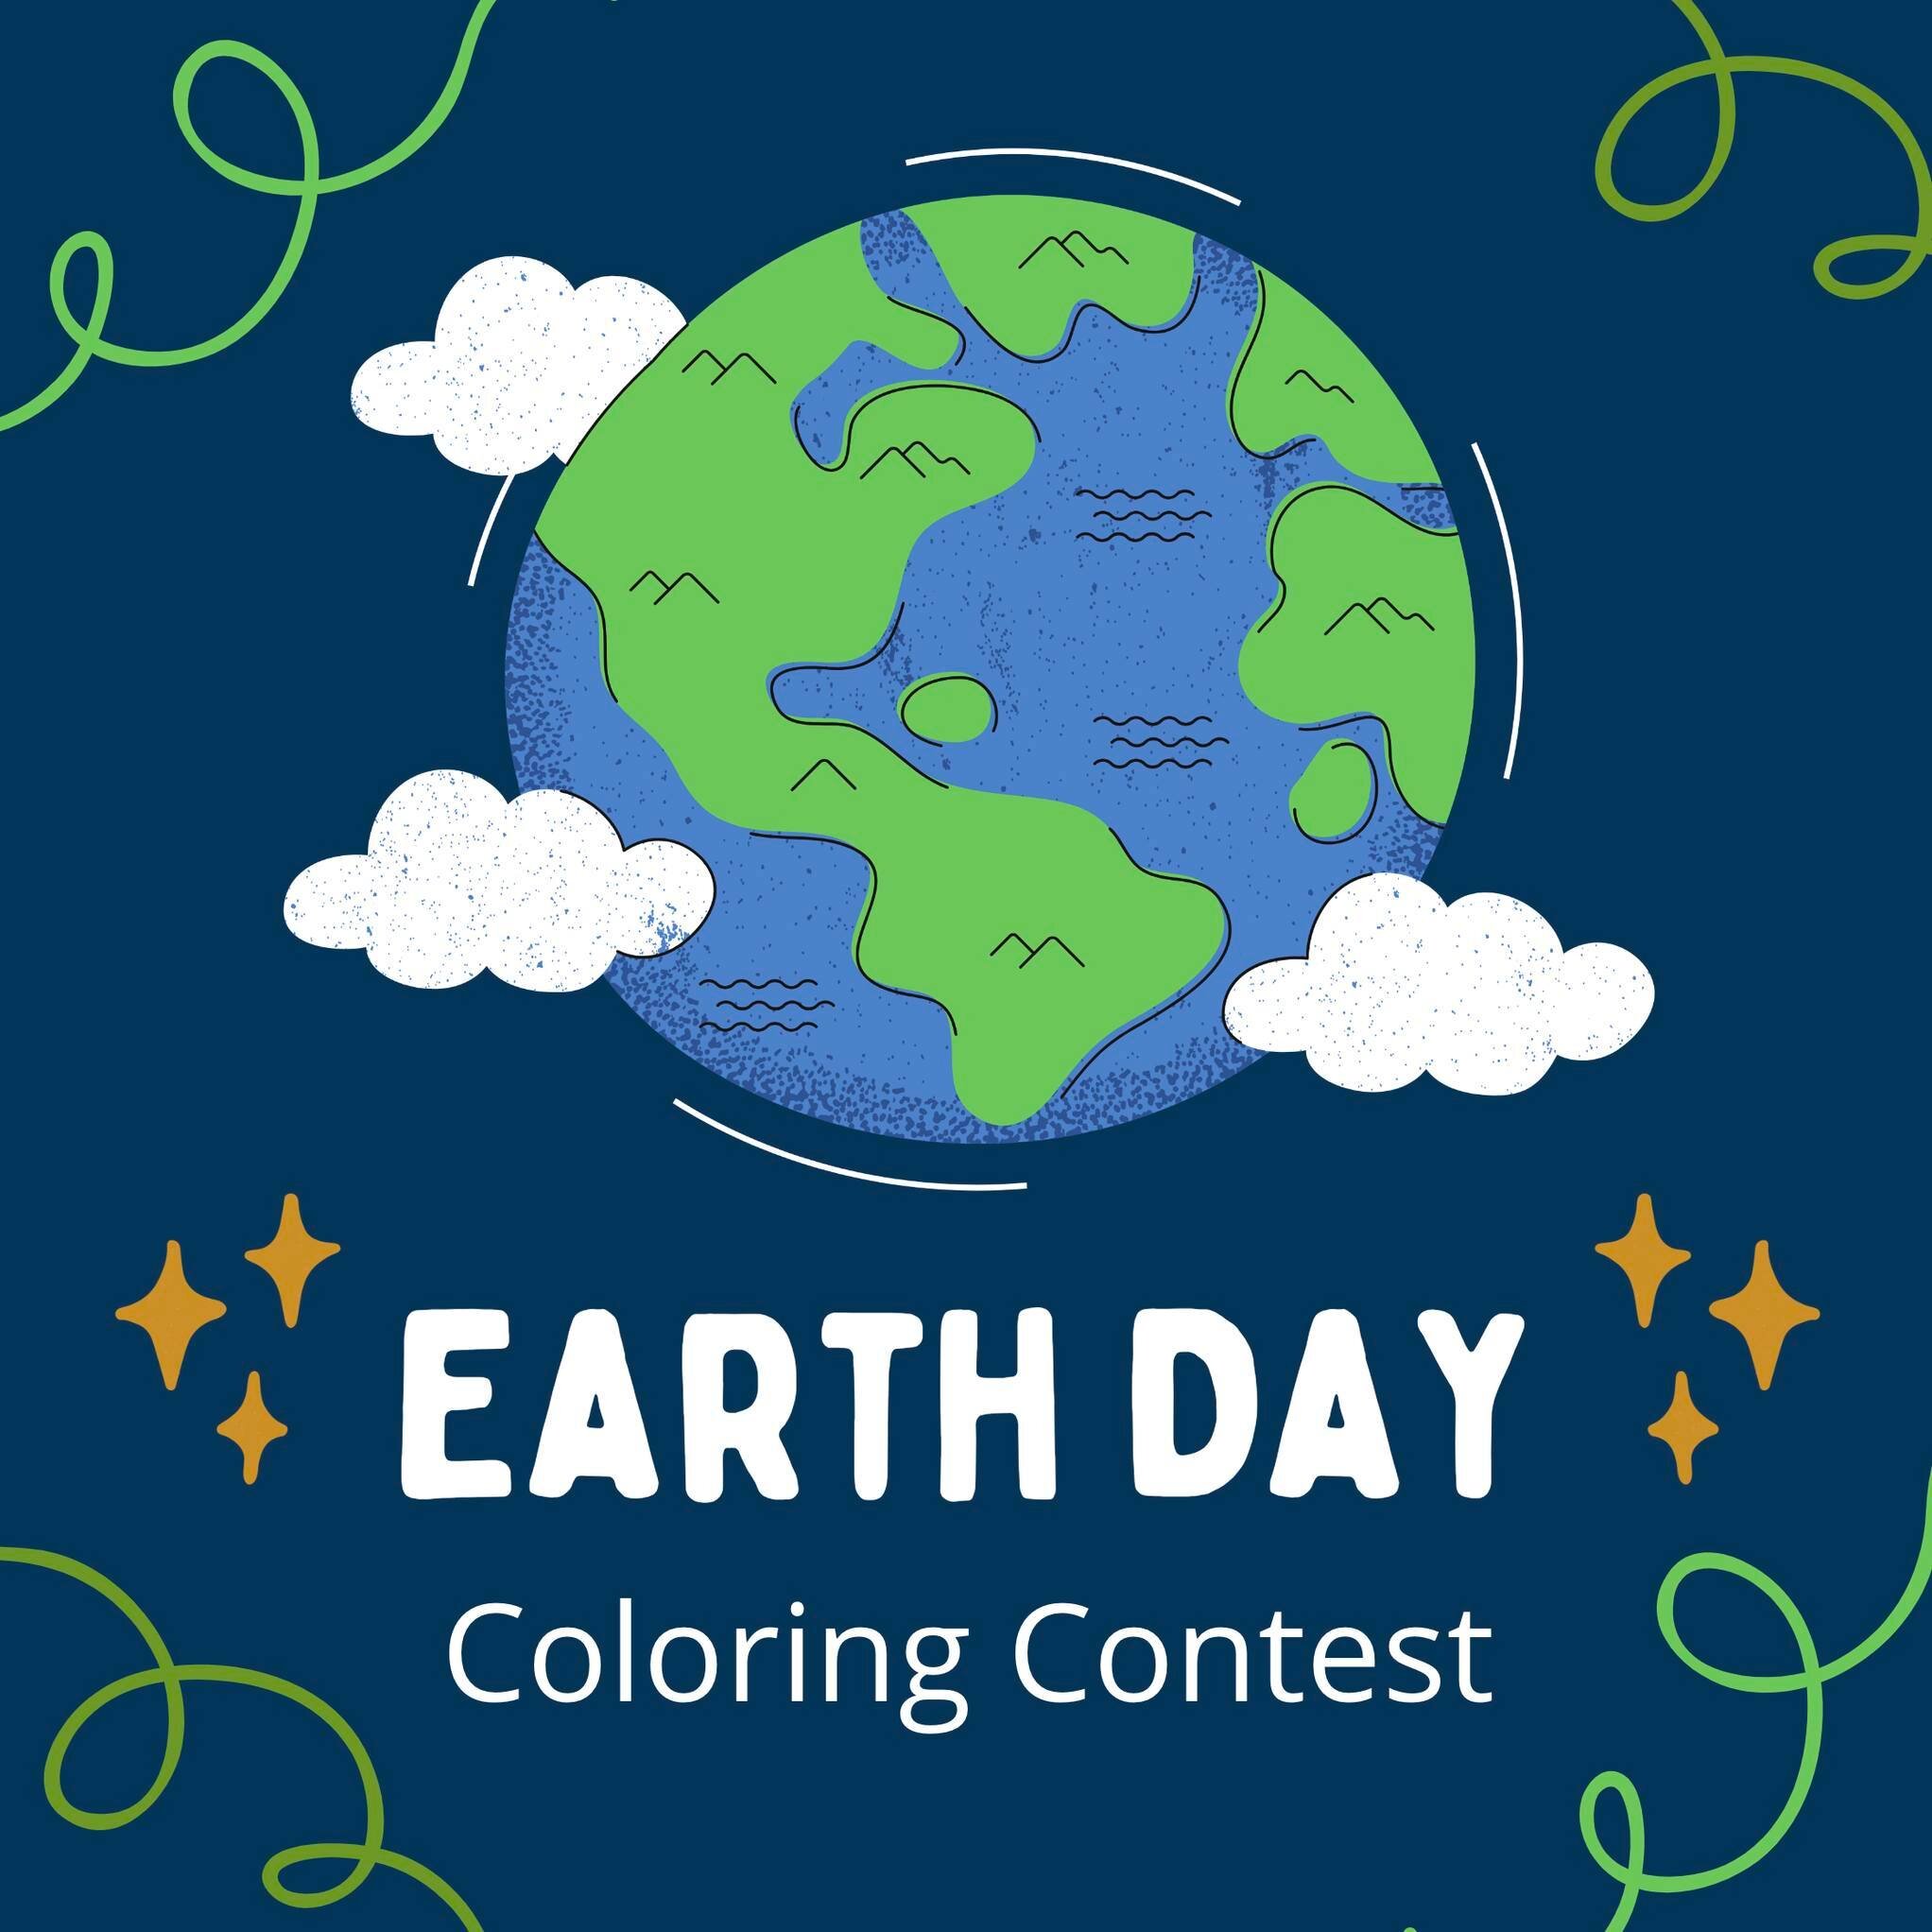 For the beginning of April, we are having a Earth Day children's coloring contest!! 💚🌱

The coloring sheet can be picked up at the office or downloaded from the website!

The contest starts today and all entries are due back by closing time on Wedn